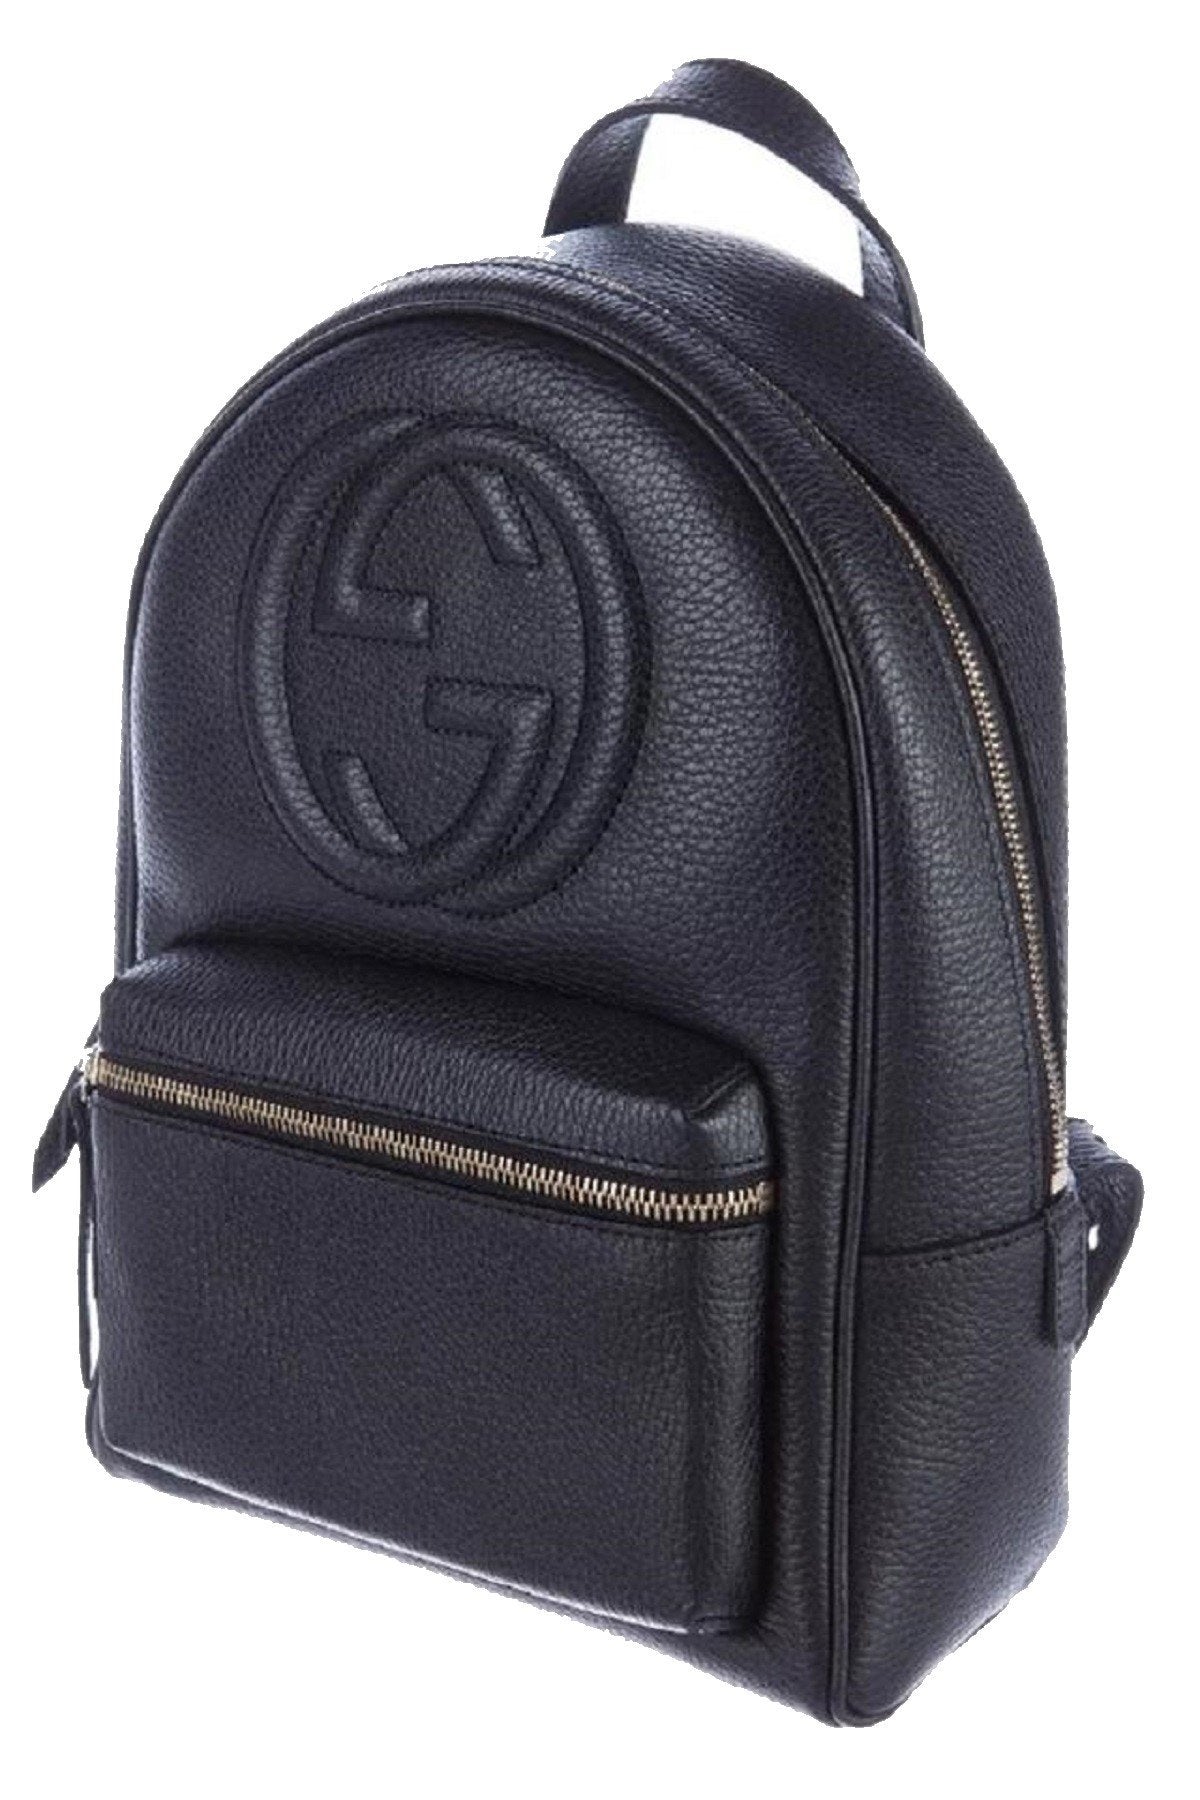 Gucci Soho GG Logo Black Leather Backpack Chain Straps – Queen Bee of ...